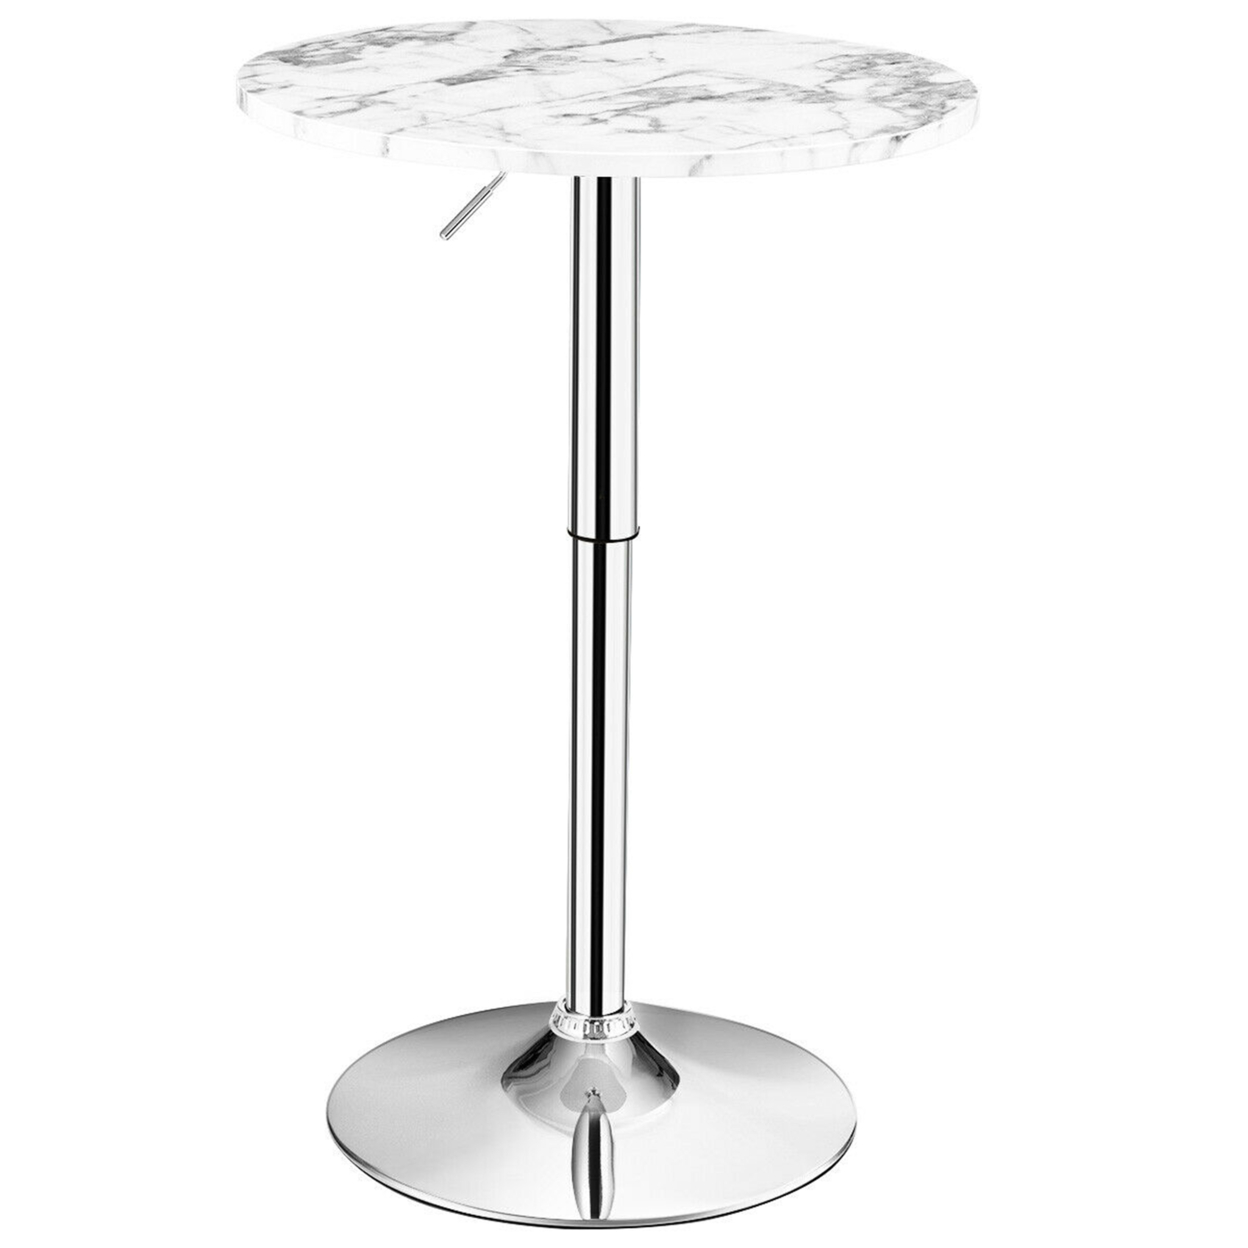 360-degree Swivel Round Pub Table Height Adjustable Bistro Bar Table W/Faux Marble Top